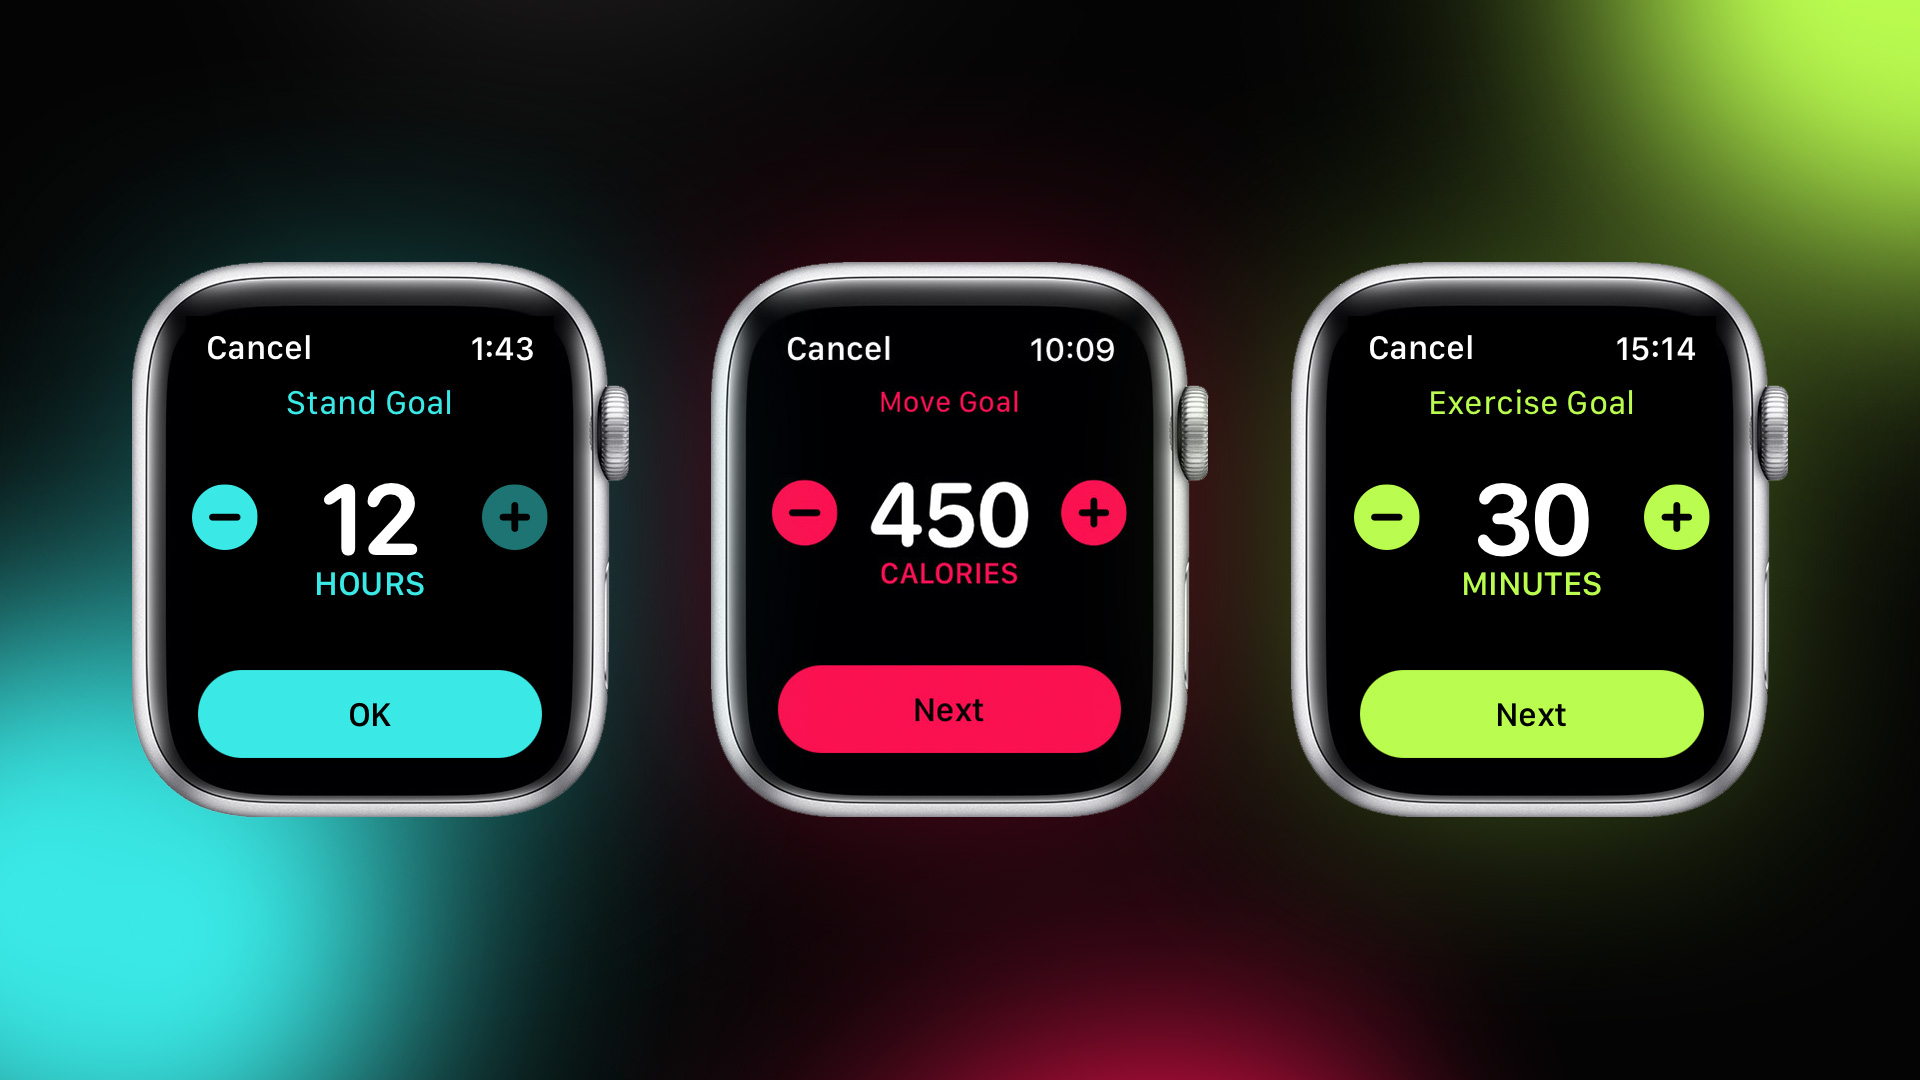 How to Modify Activity Goals on Apple Watch FI